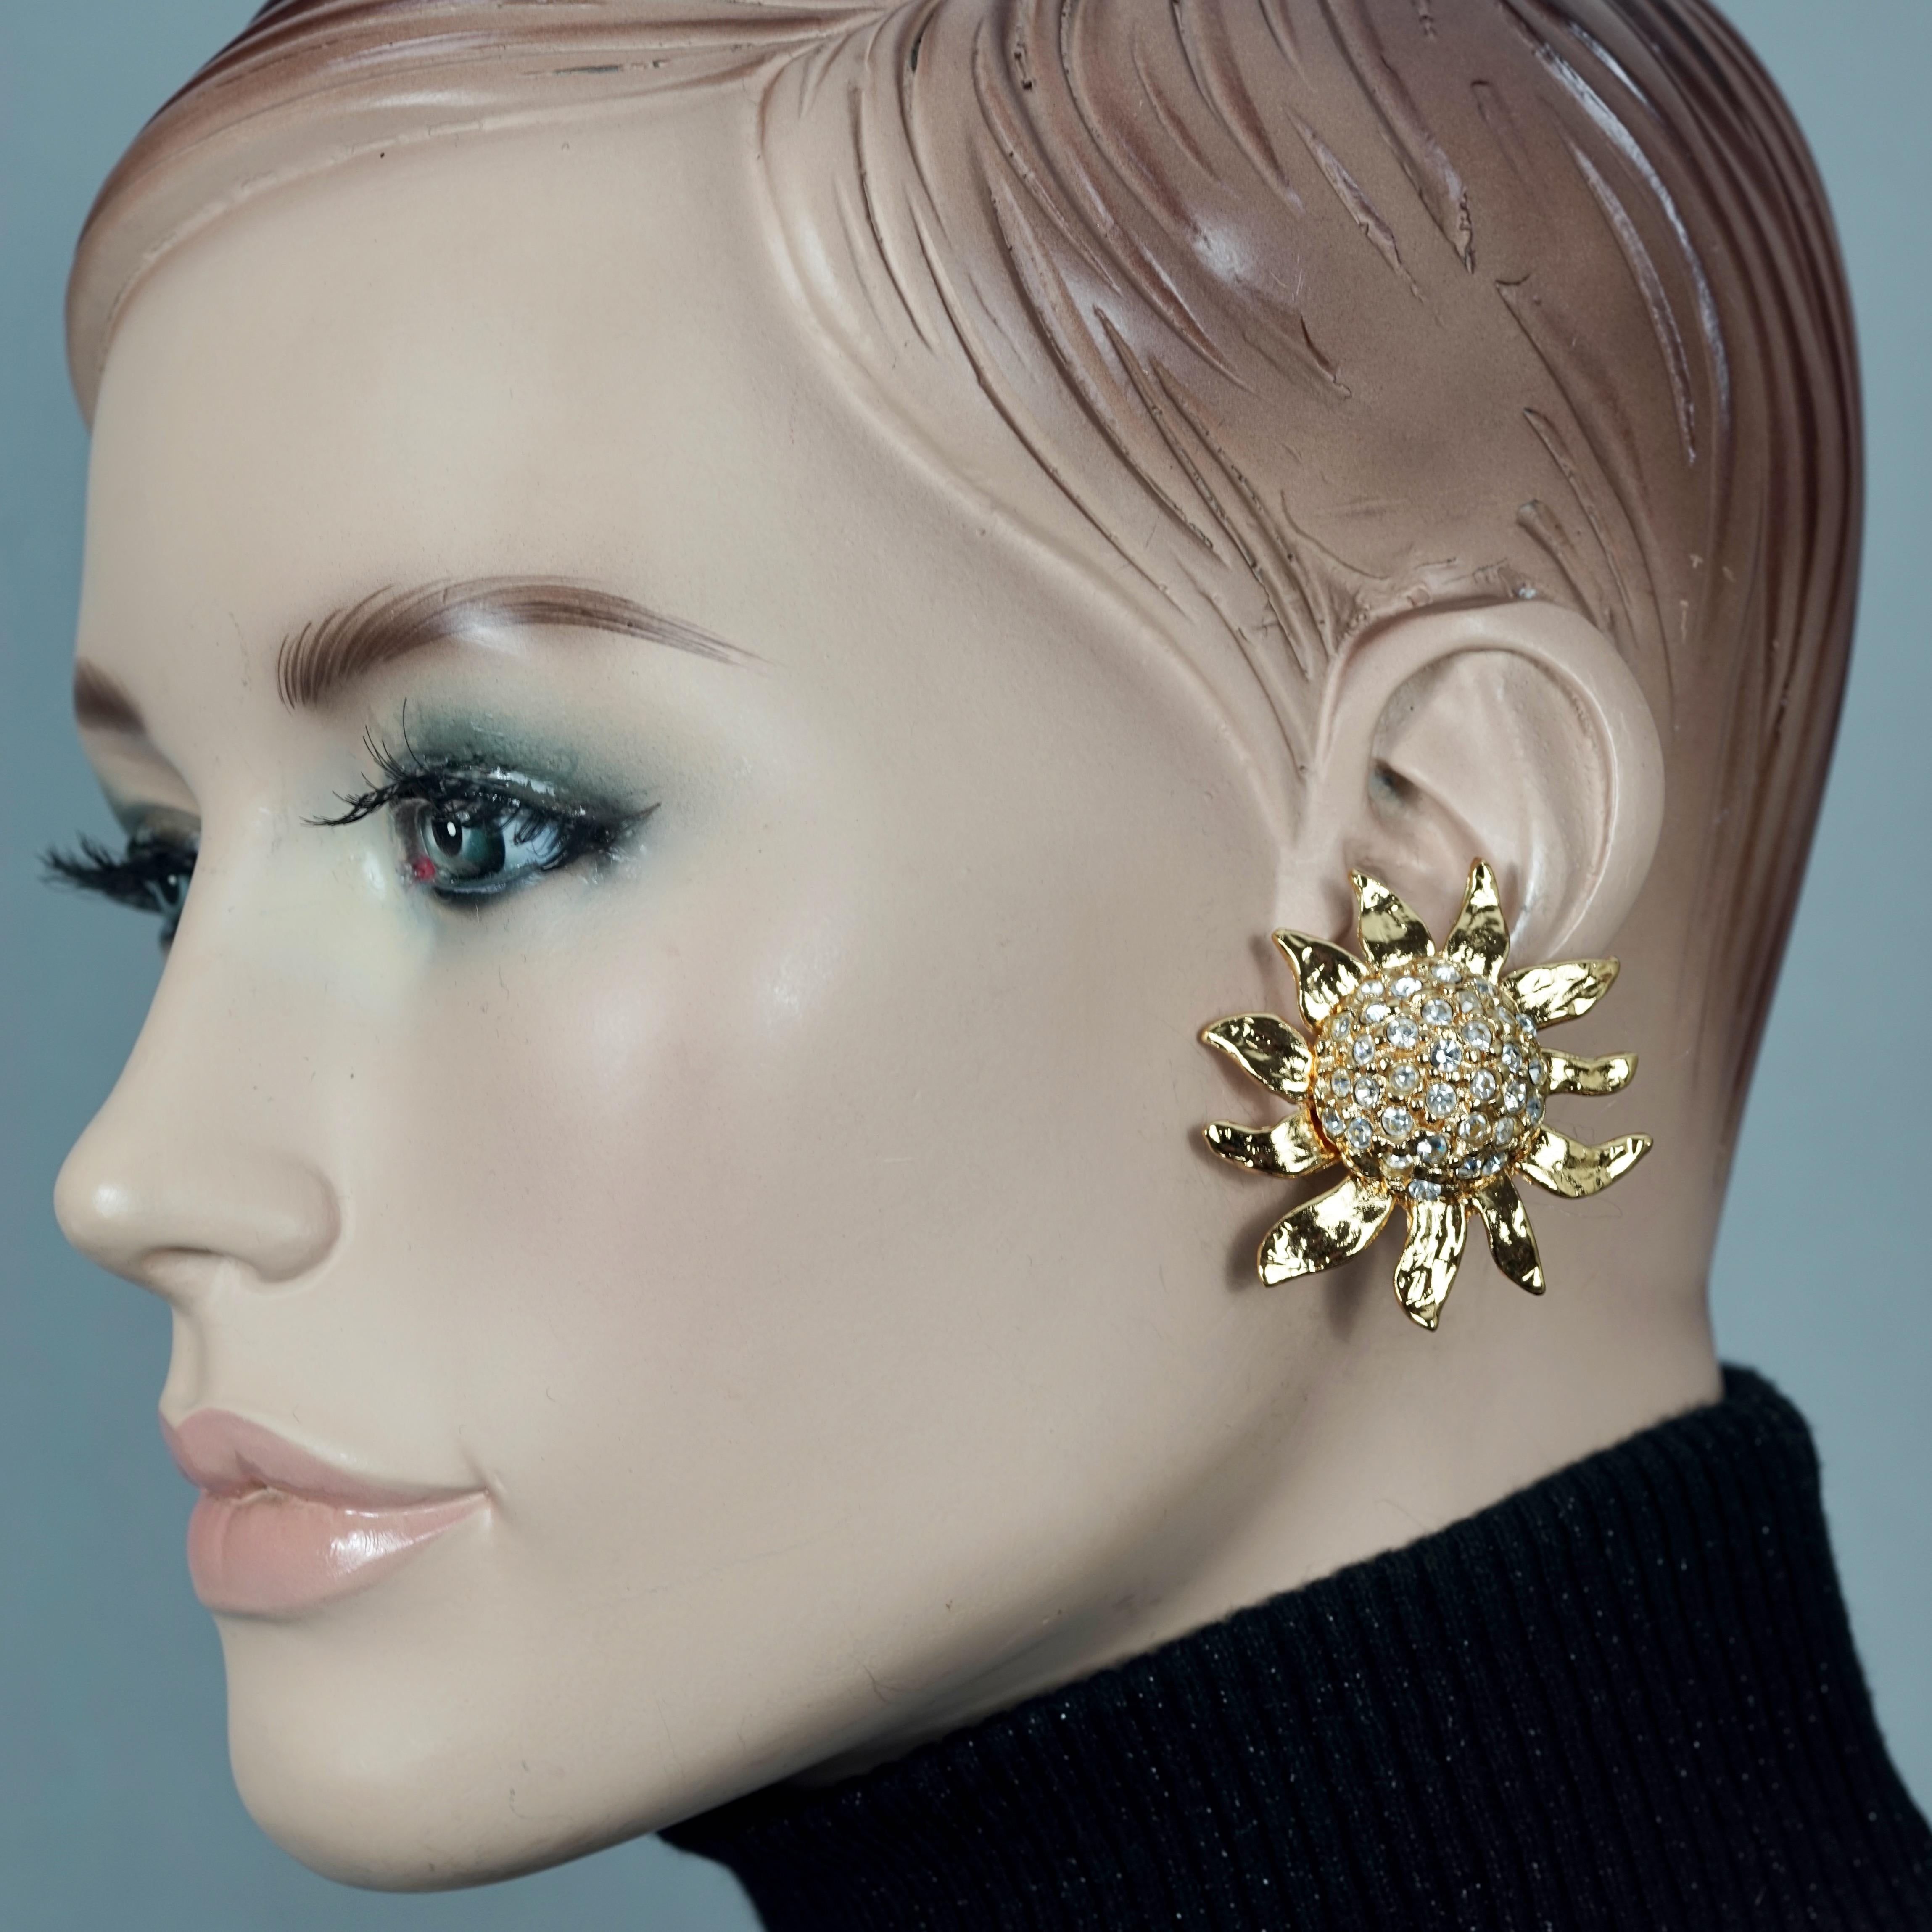 Vintage Massive YVES SAINT LAURENT Ysl Sunflower Earrings

Measurements:
Height: 1.77 inches (4.5 cm)
Width:  1.77 inches (4.5 cm)
Weight: 20 grams

Features:
- 100% Authentic YVES SAINT LAURENT.
- 3D sunflower earrings with studded rhinestones.
-